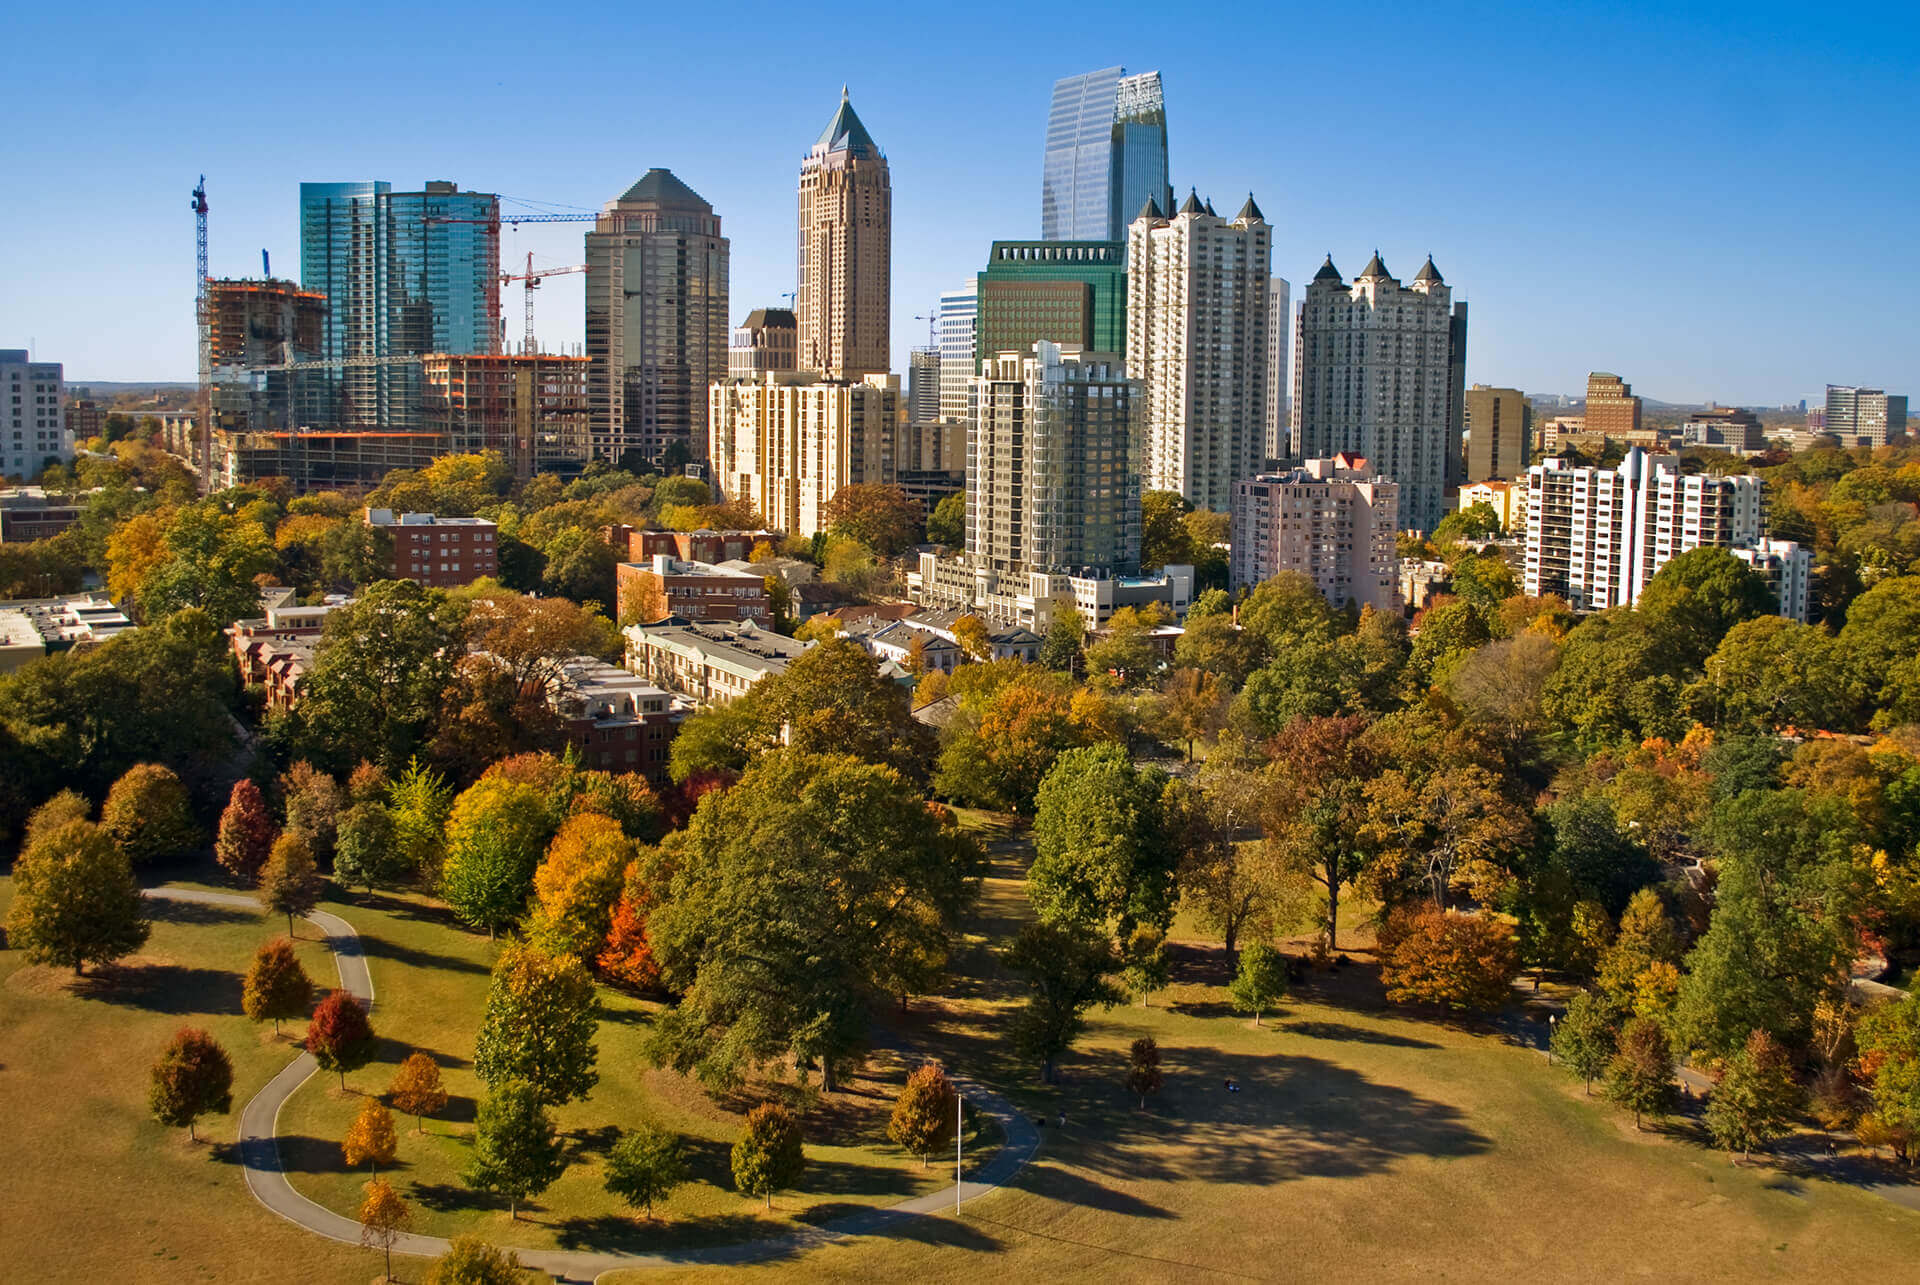 Piedmont park during fall